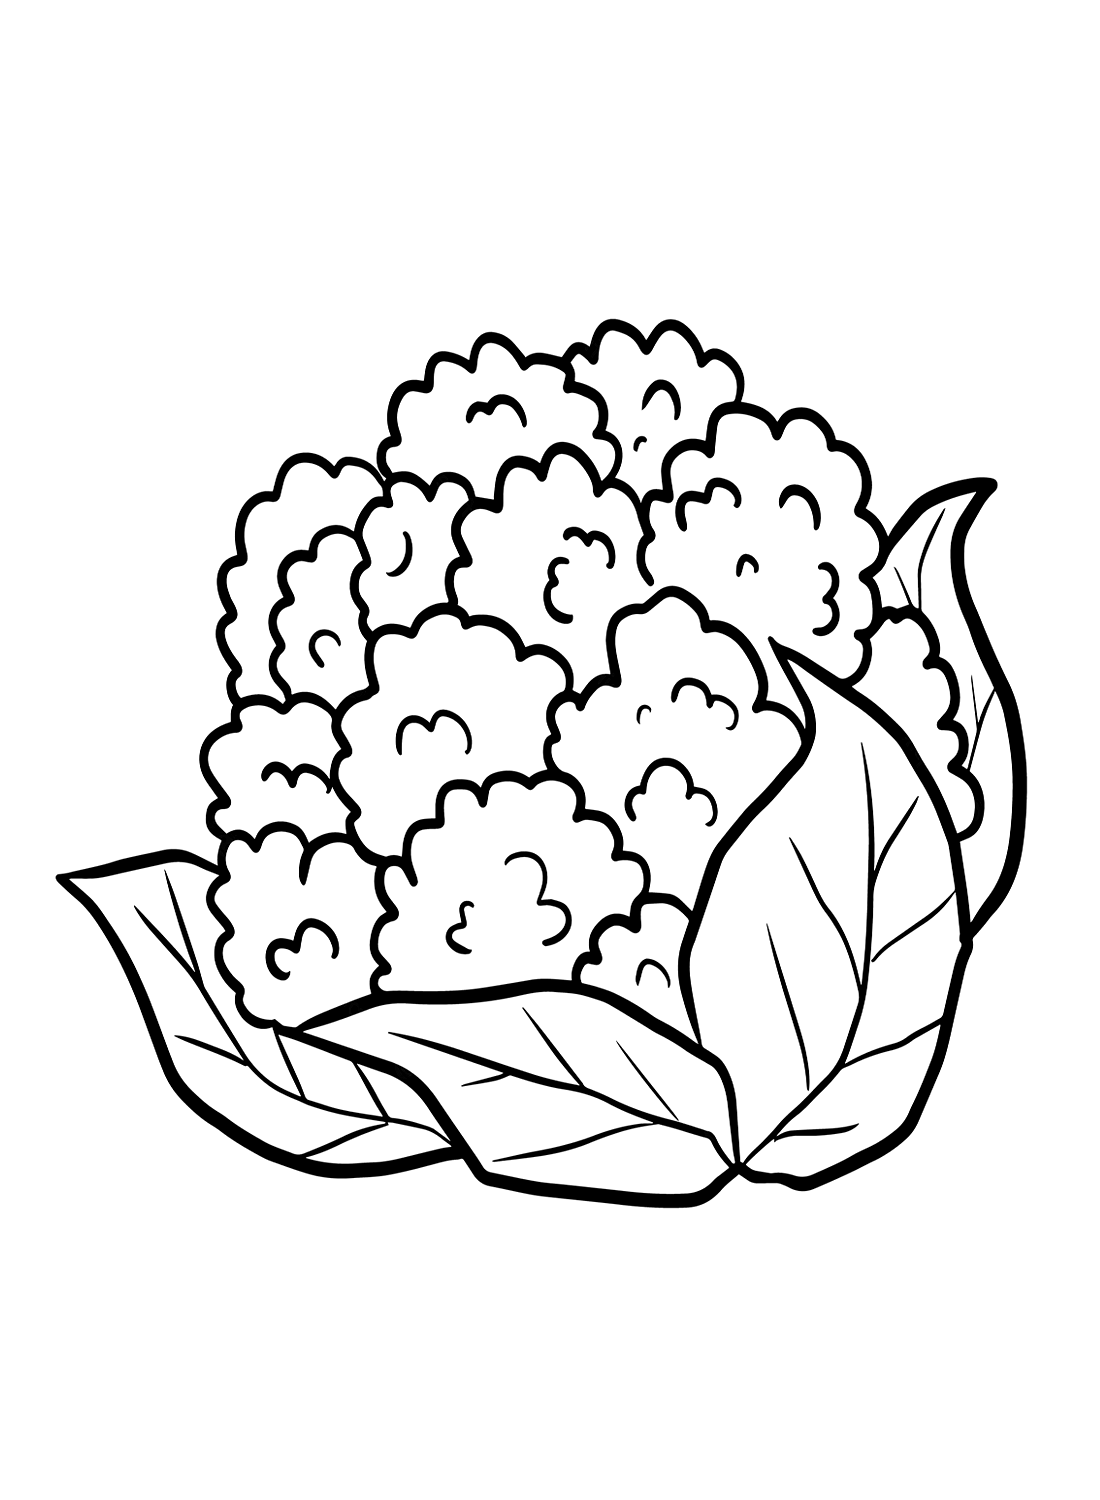 Cauliflower Coloring Page from Cauliflower